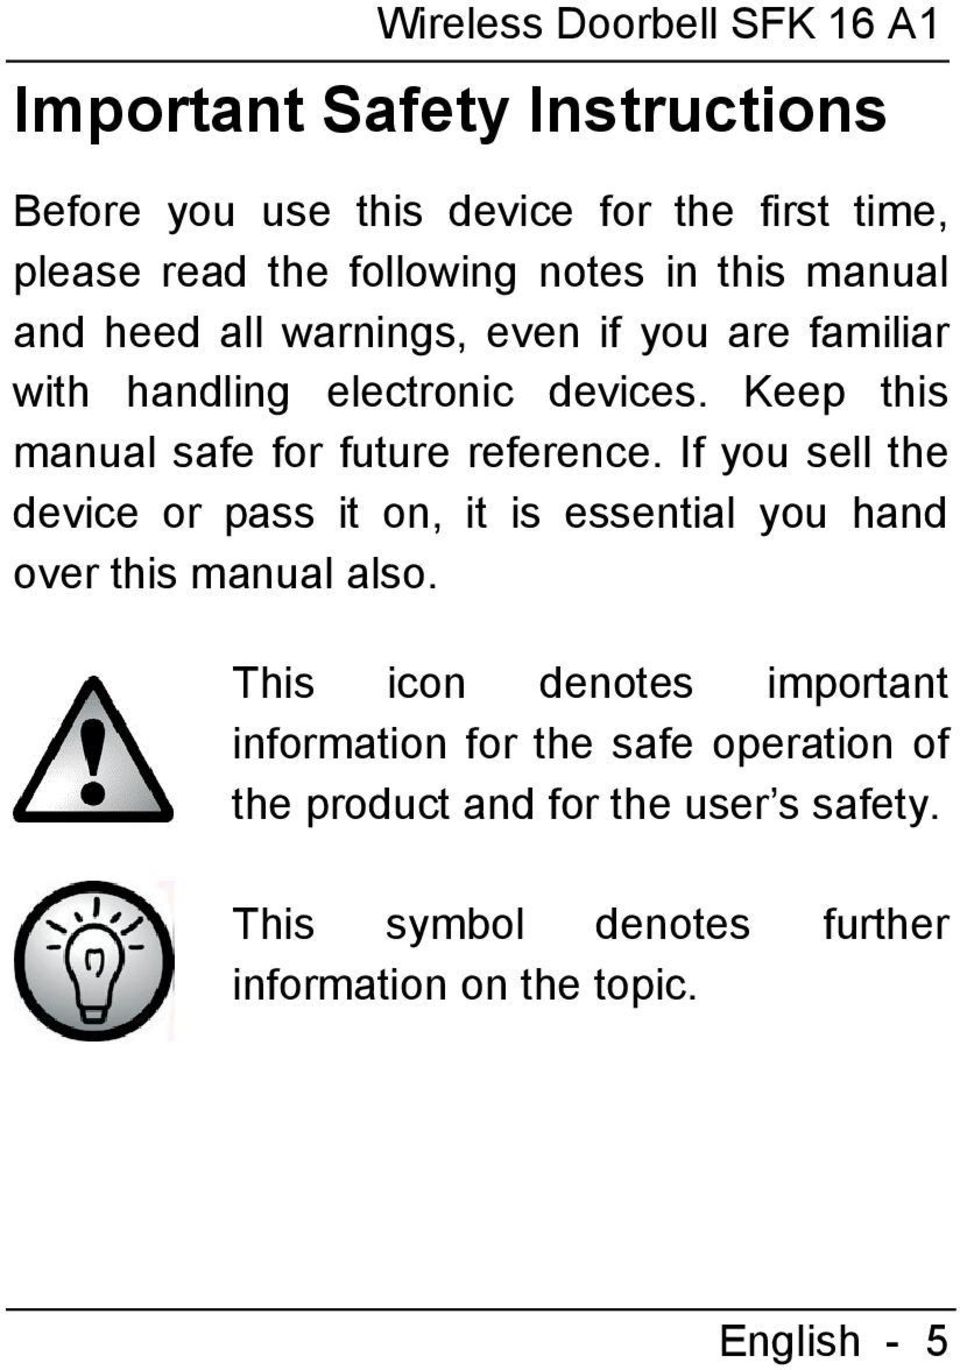 Keep this manual safe for future reference. If you sell the device or pass it on, it is essential you hand over this manual also.